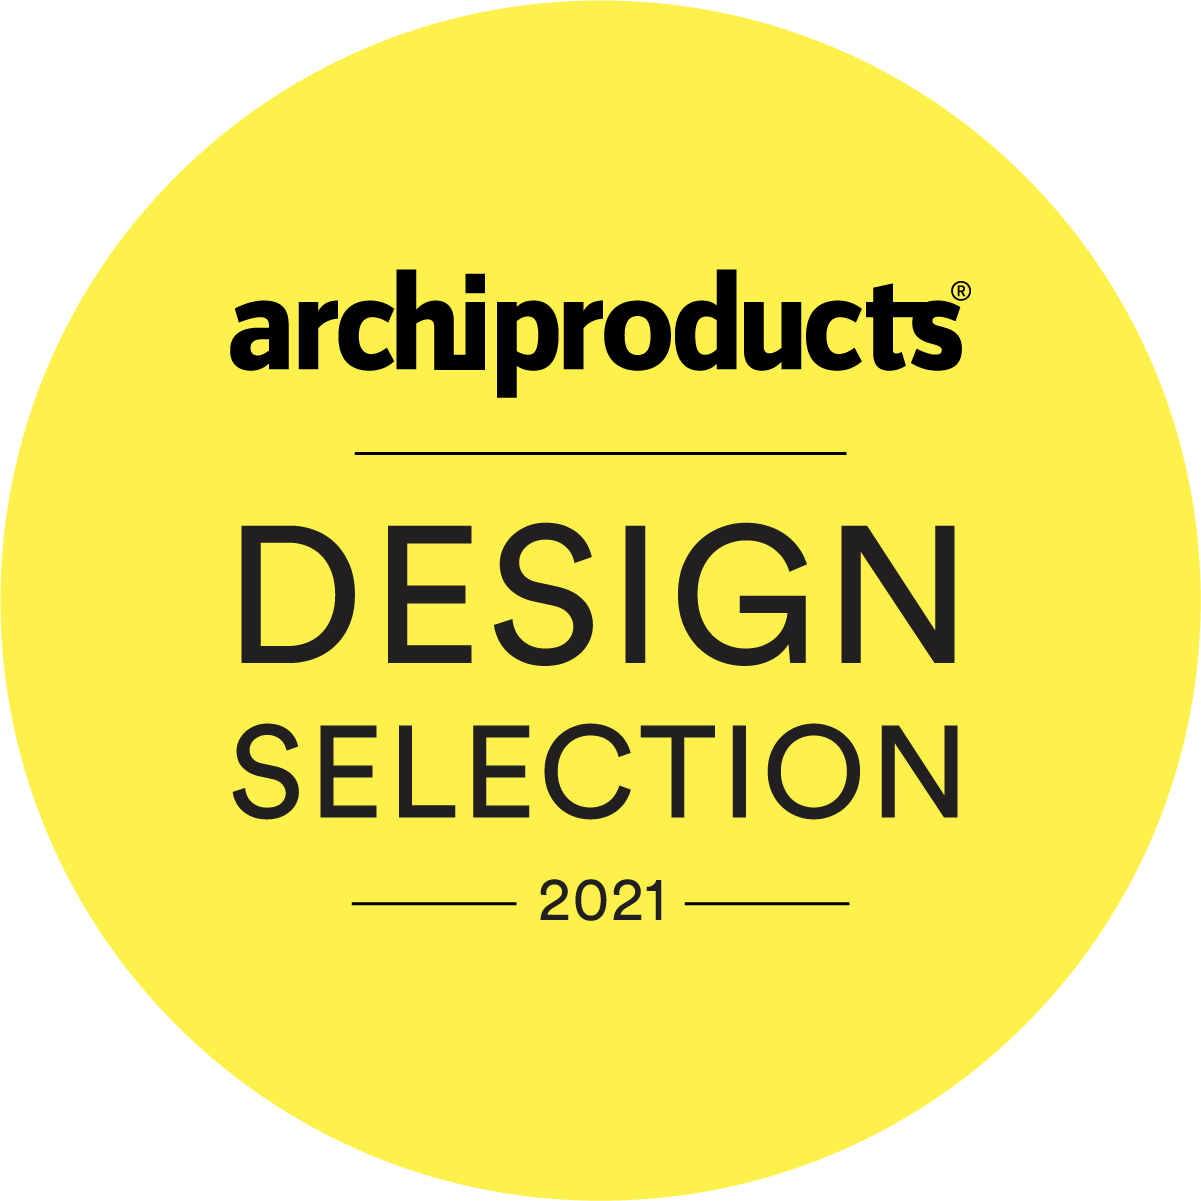 Archiproducts Design Selection